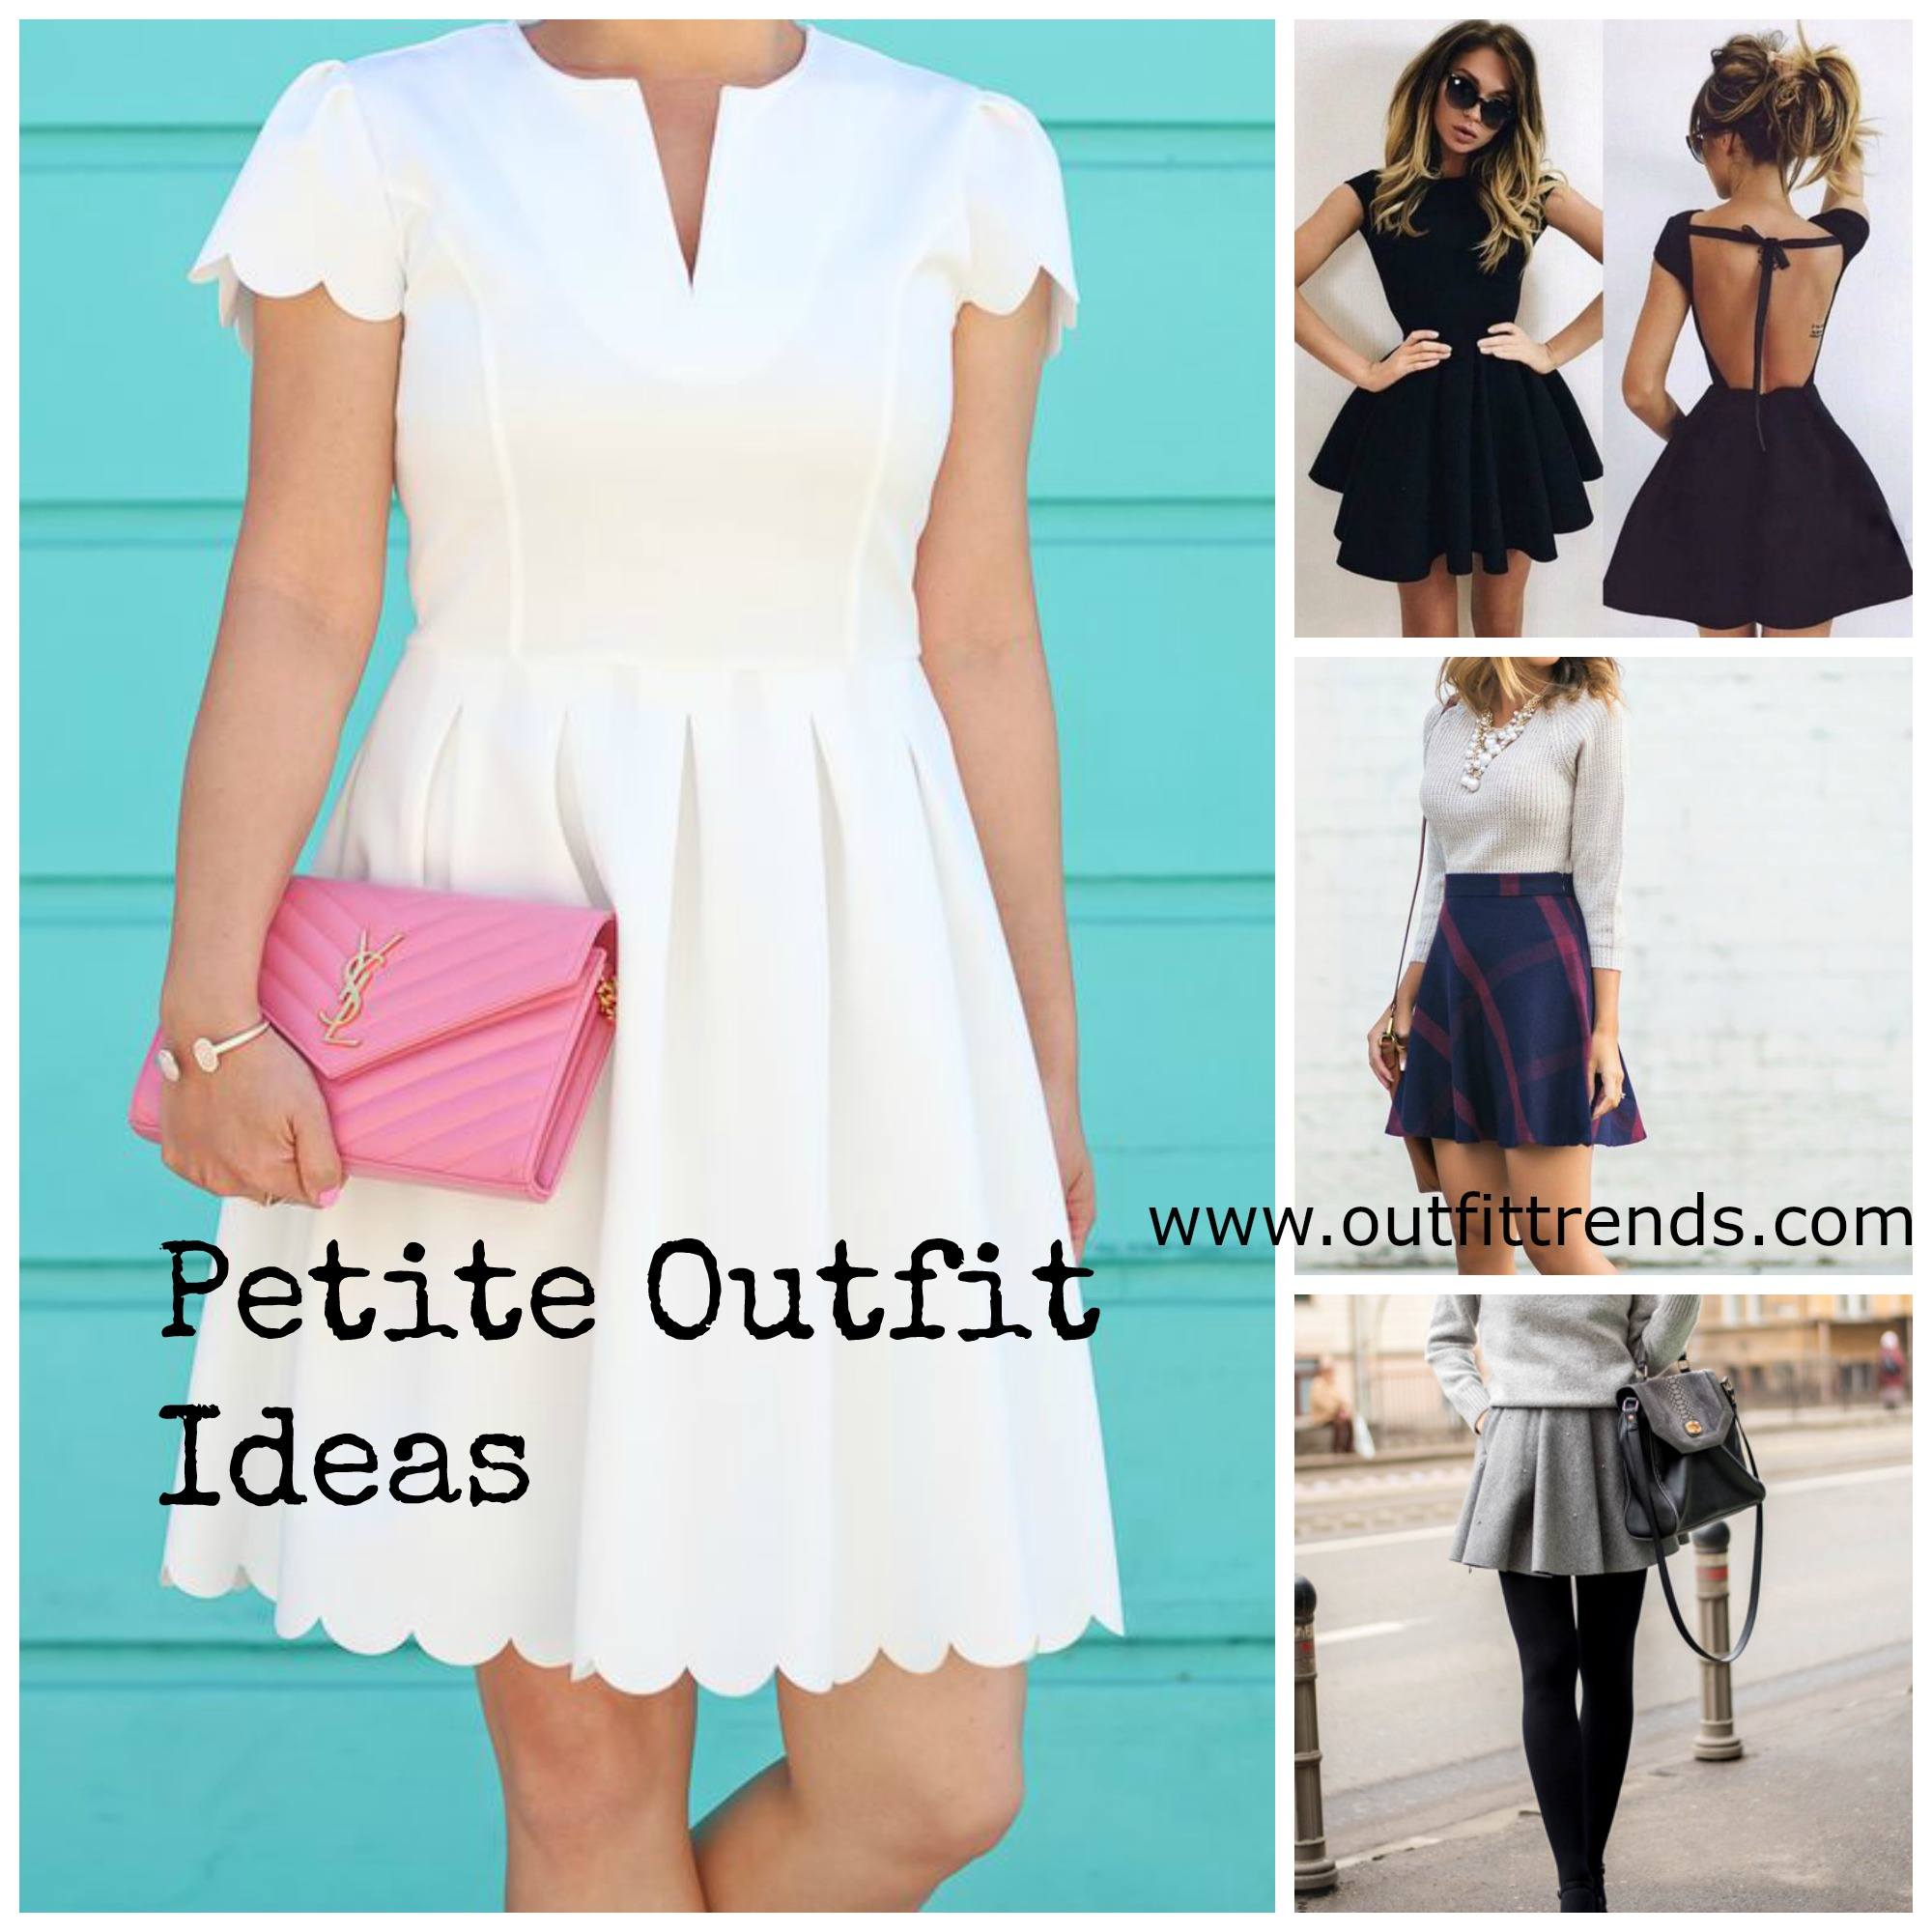 Petite Outfits Ideas-12 Latest Fashion Trends for Short Women